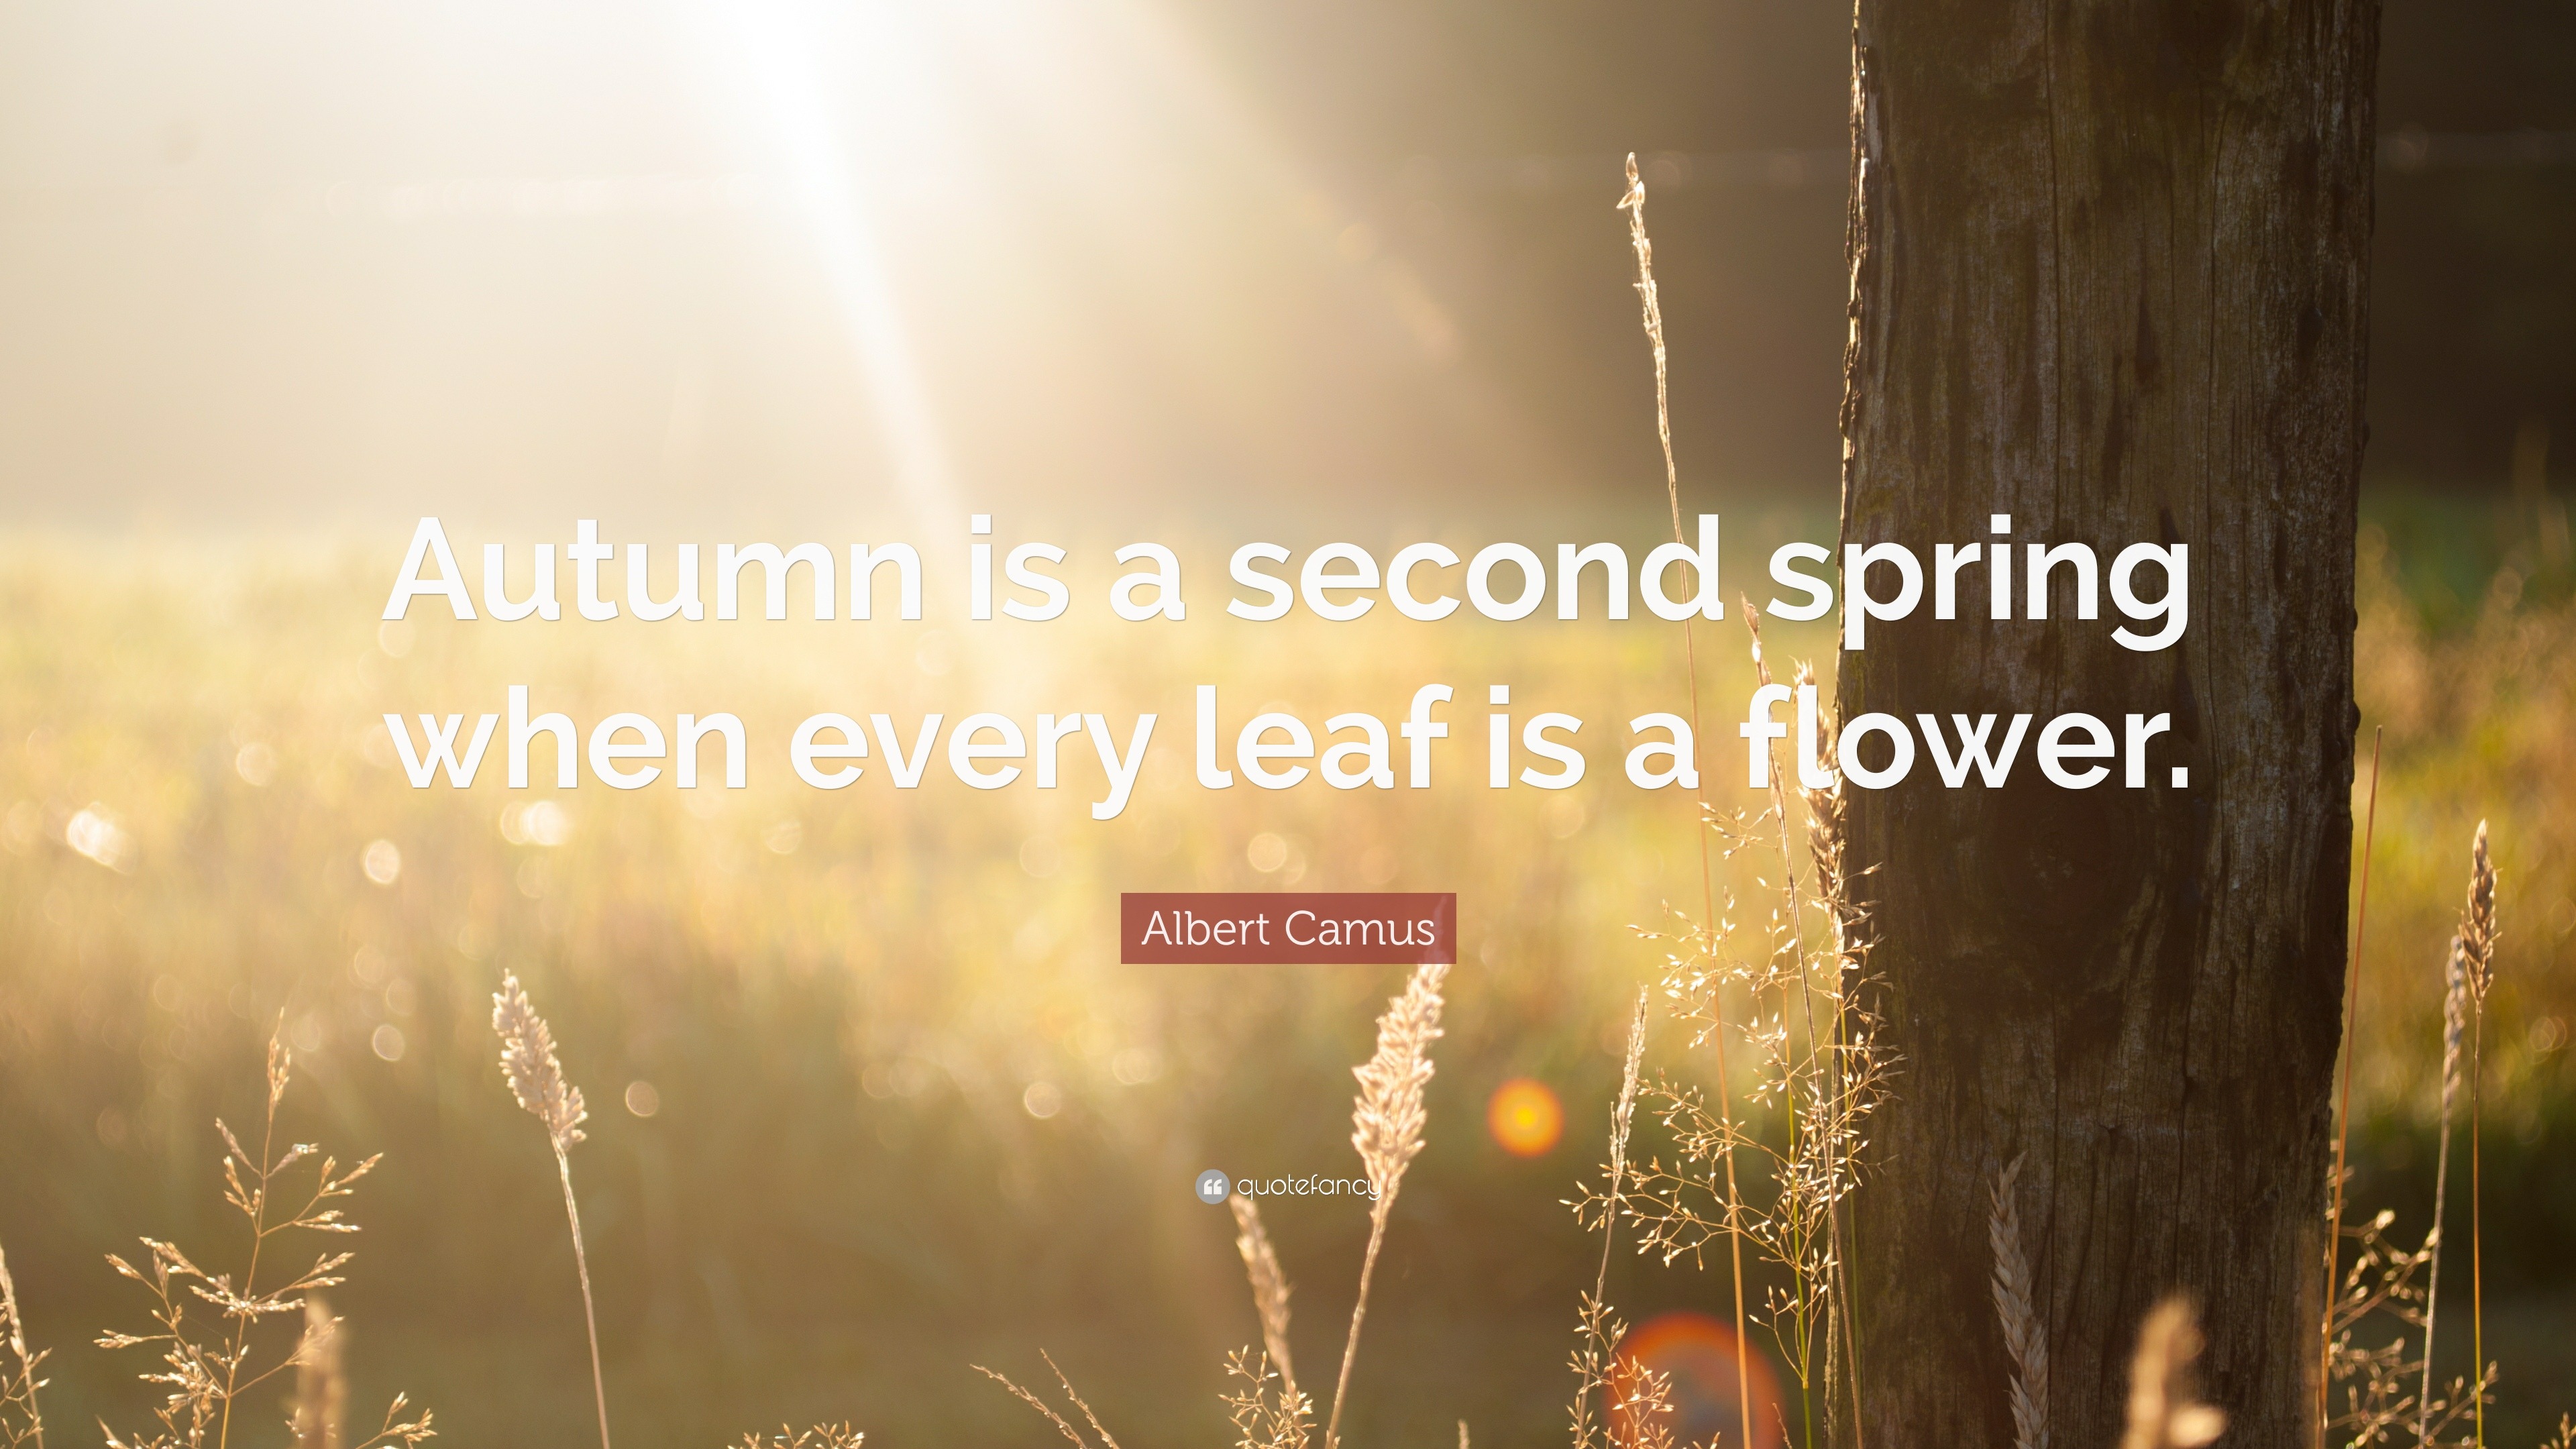 Albert Camus Quote: “Autumn is a second spring when every leaf is a ...